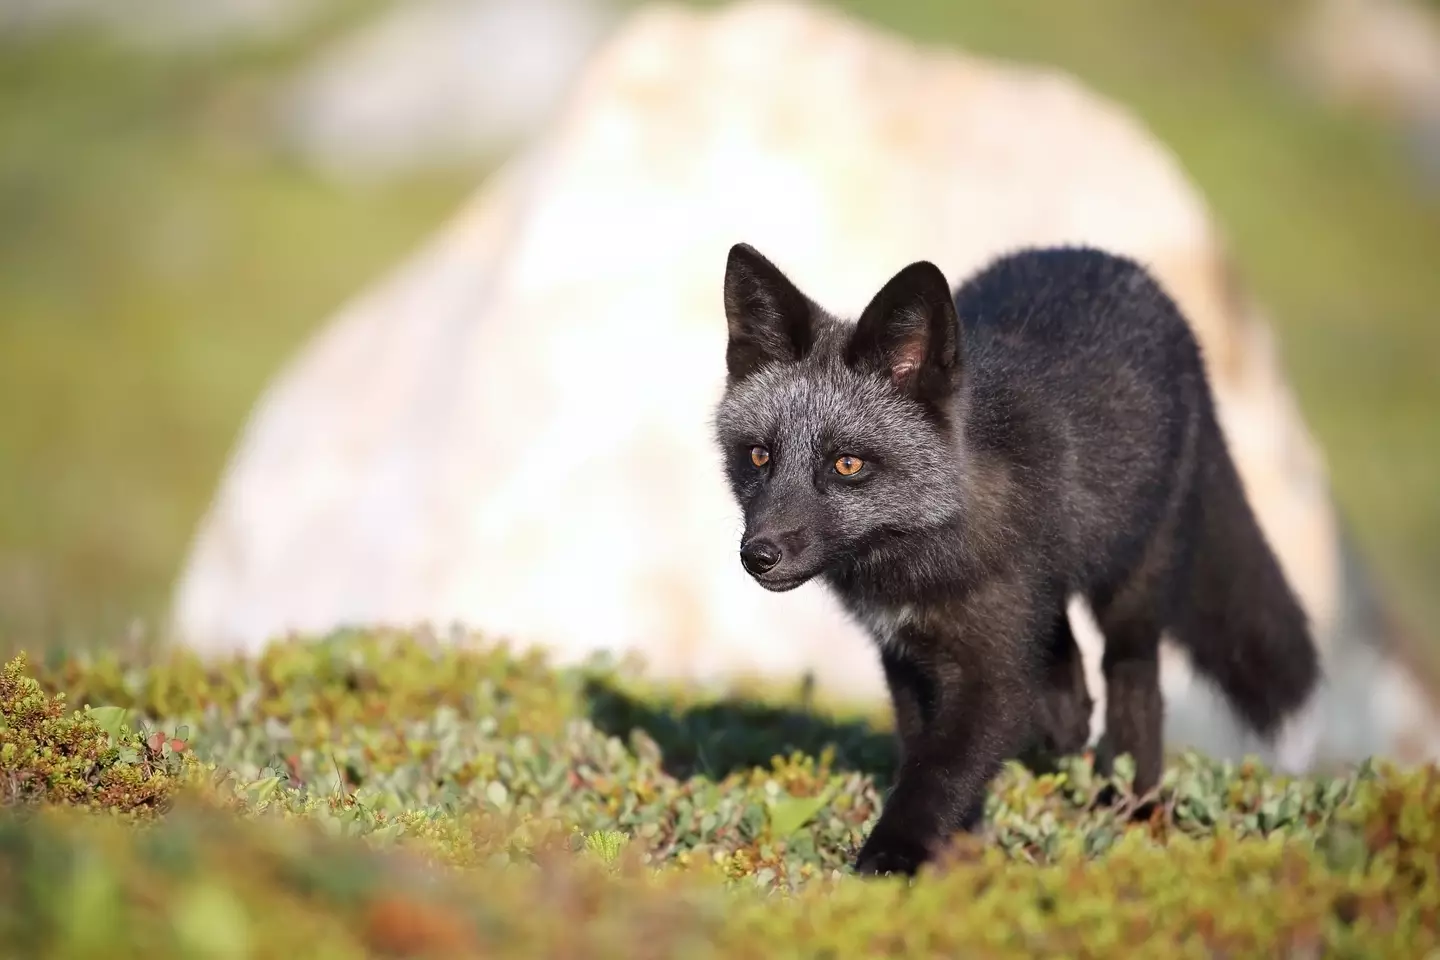 Could the black fox explain the big cat sightings in the UK?